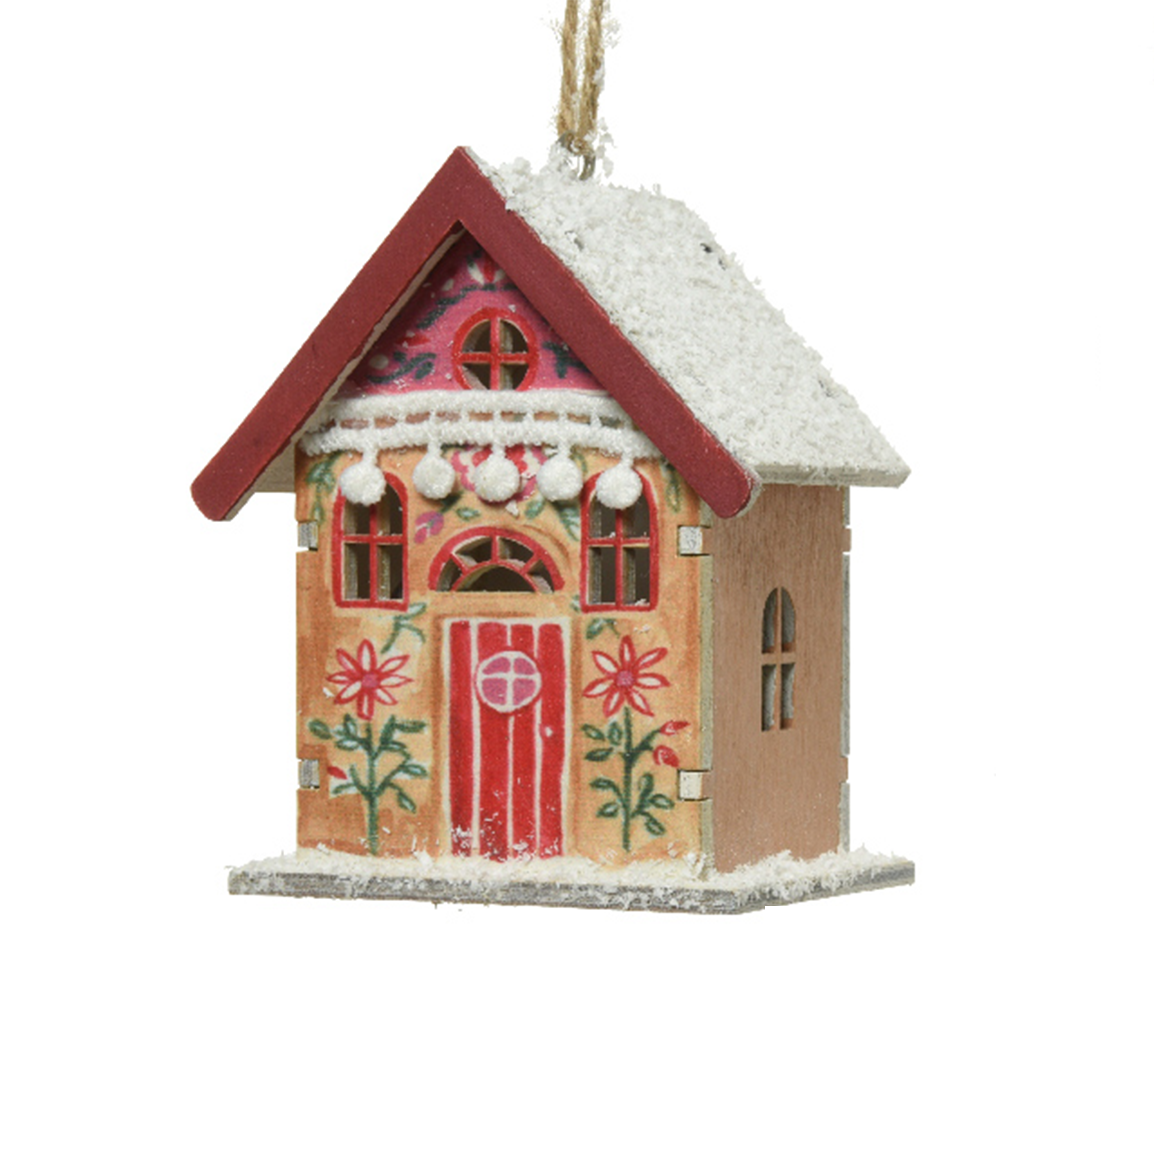 Brown nordic style house tree decoration.